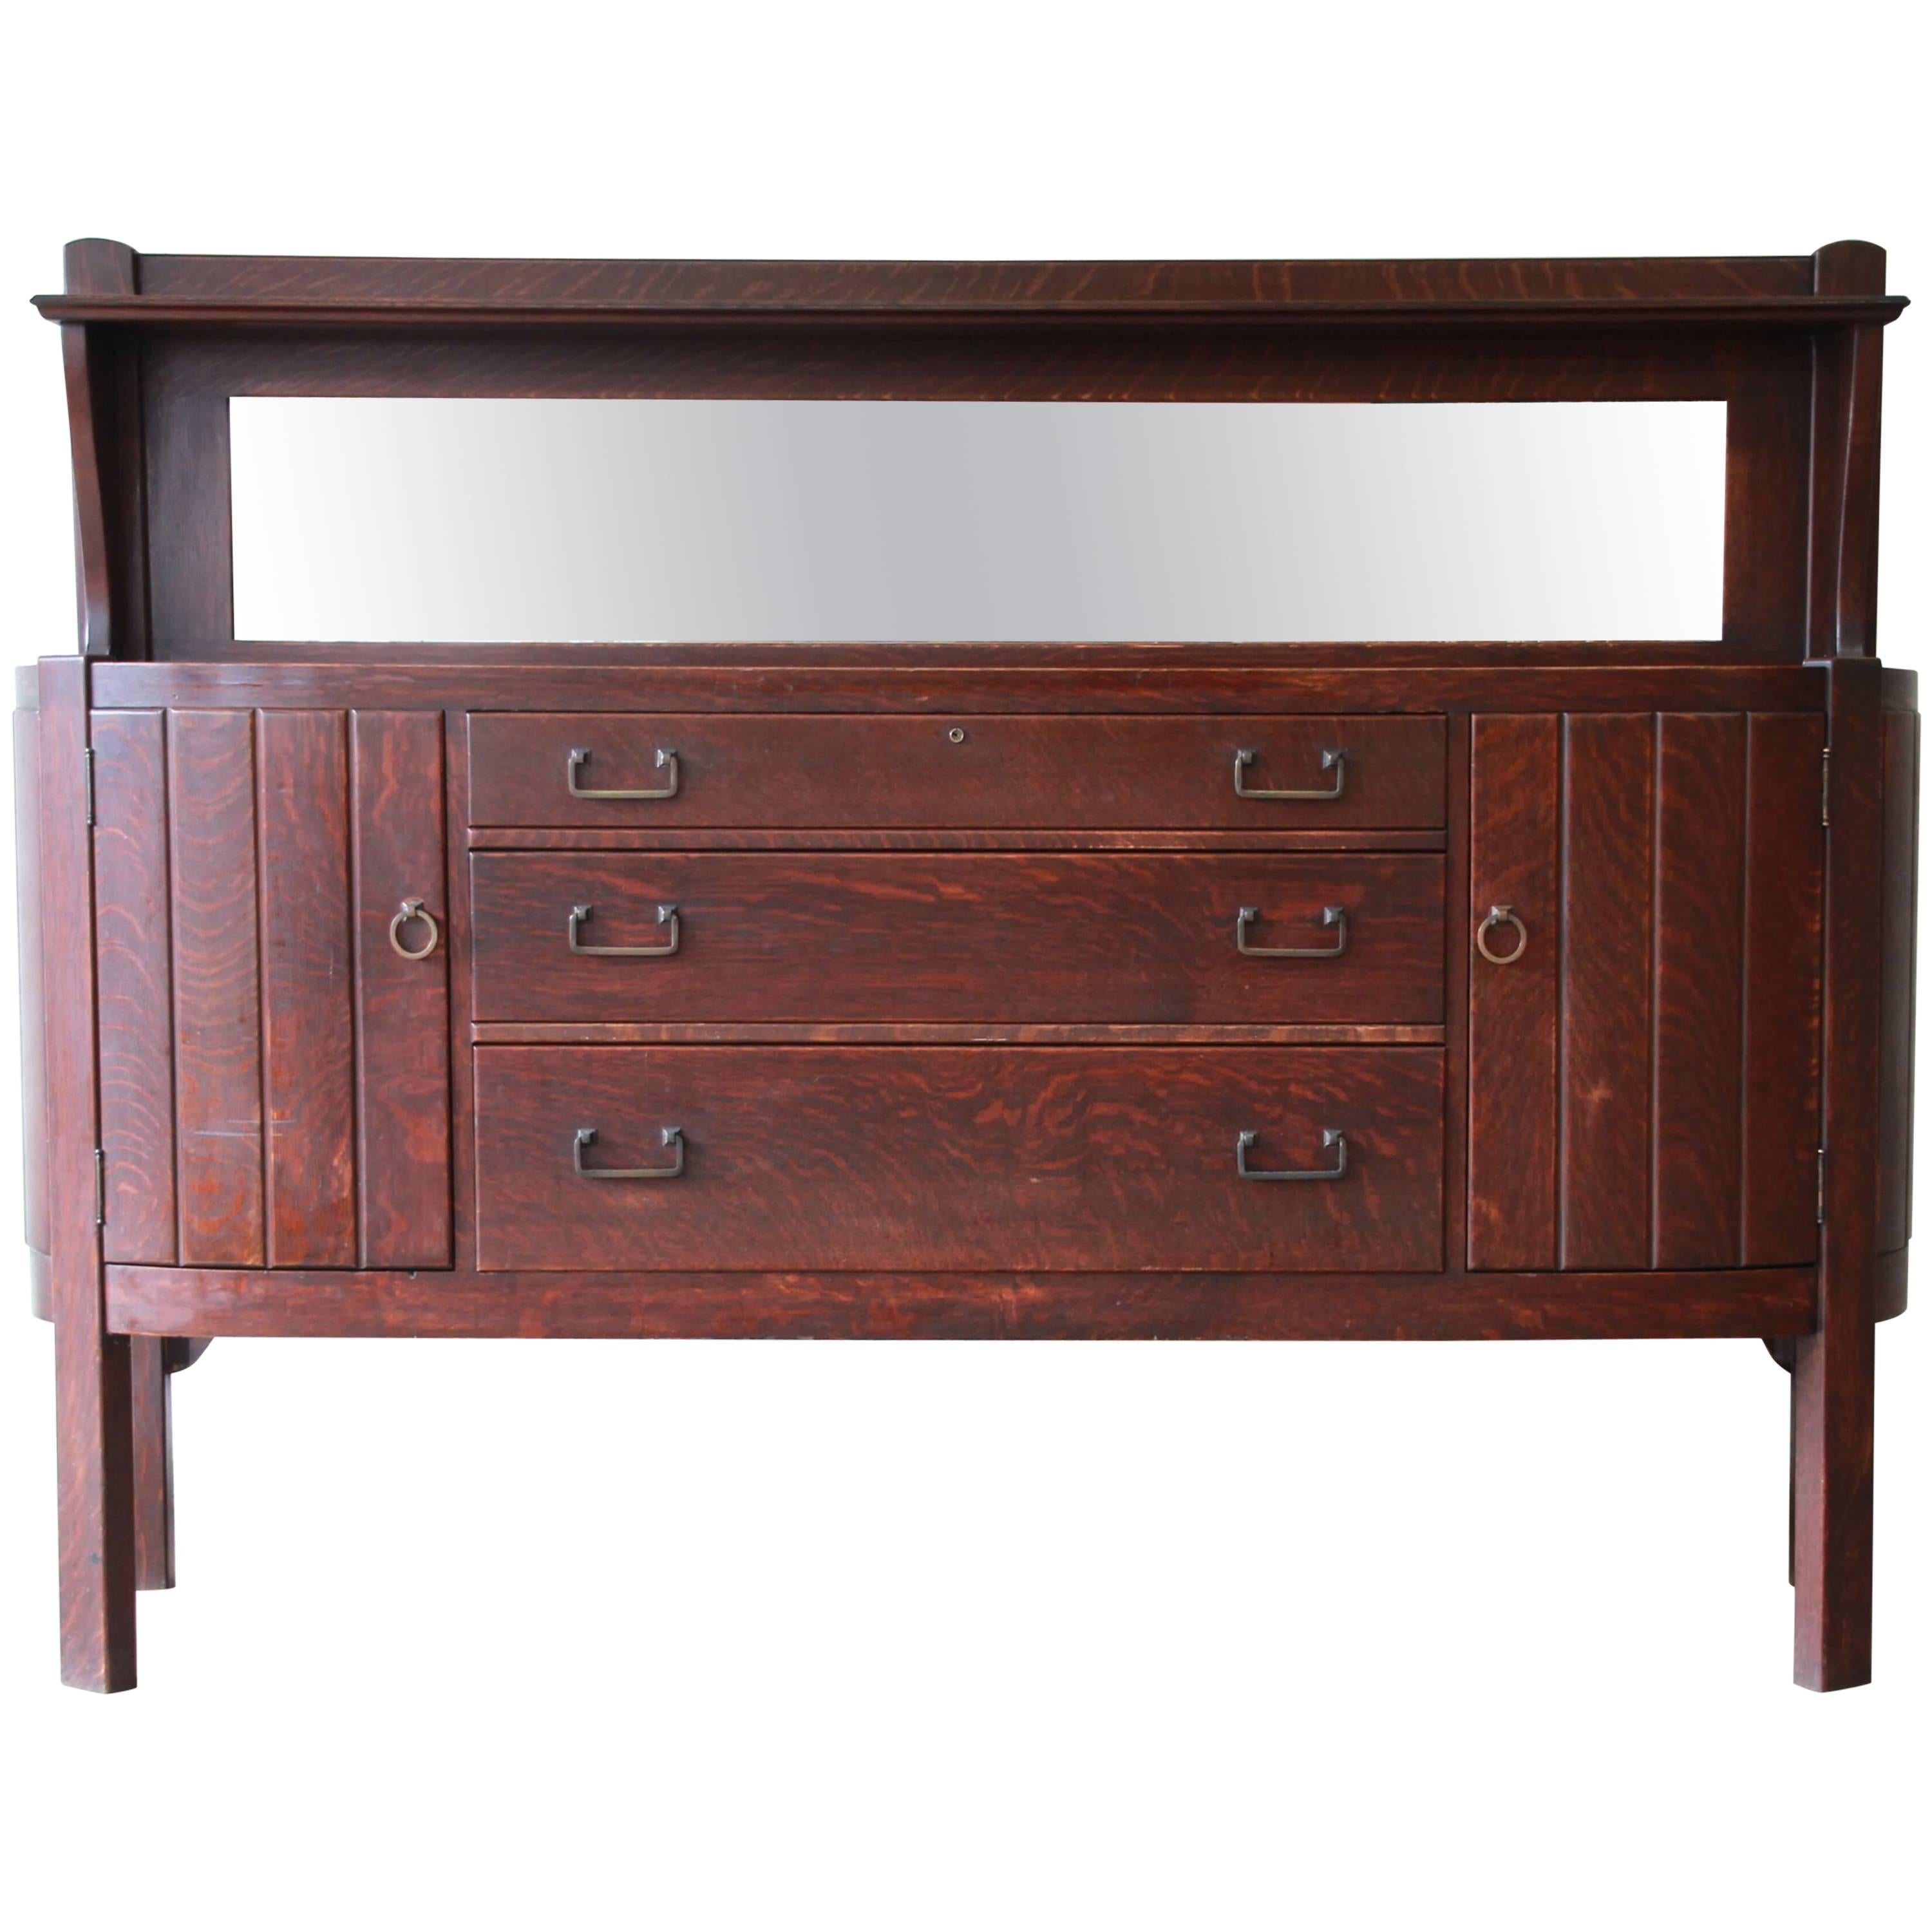 Antique Mission Oak Sideboard by Grand Rapids Chair Co., circa 1910